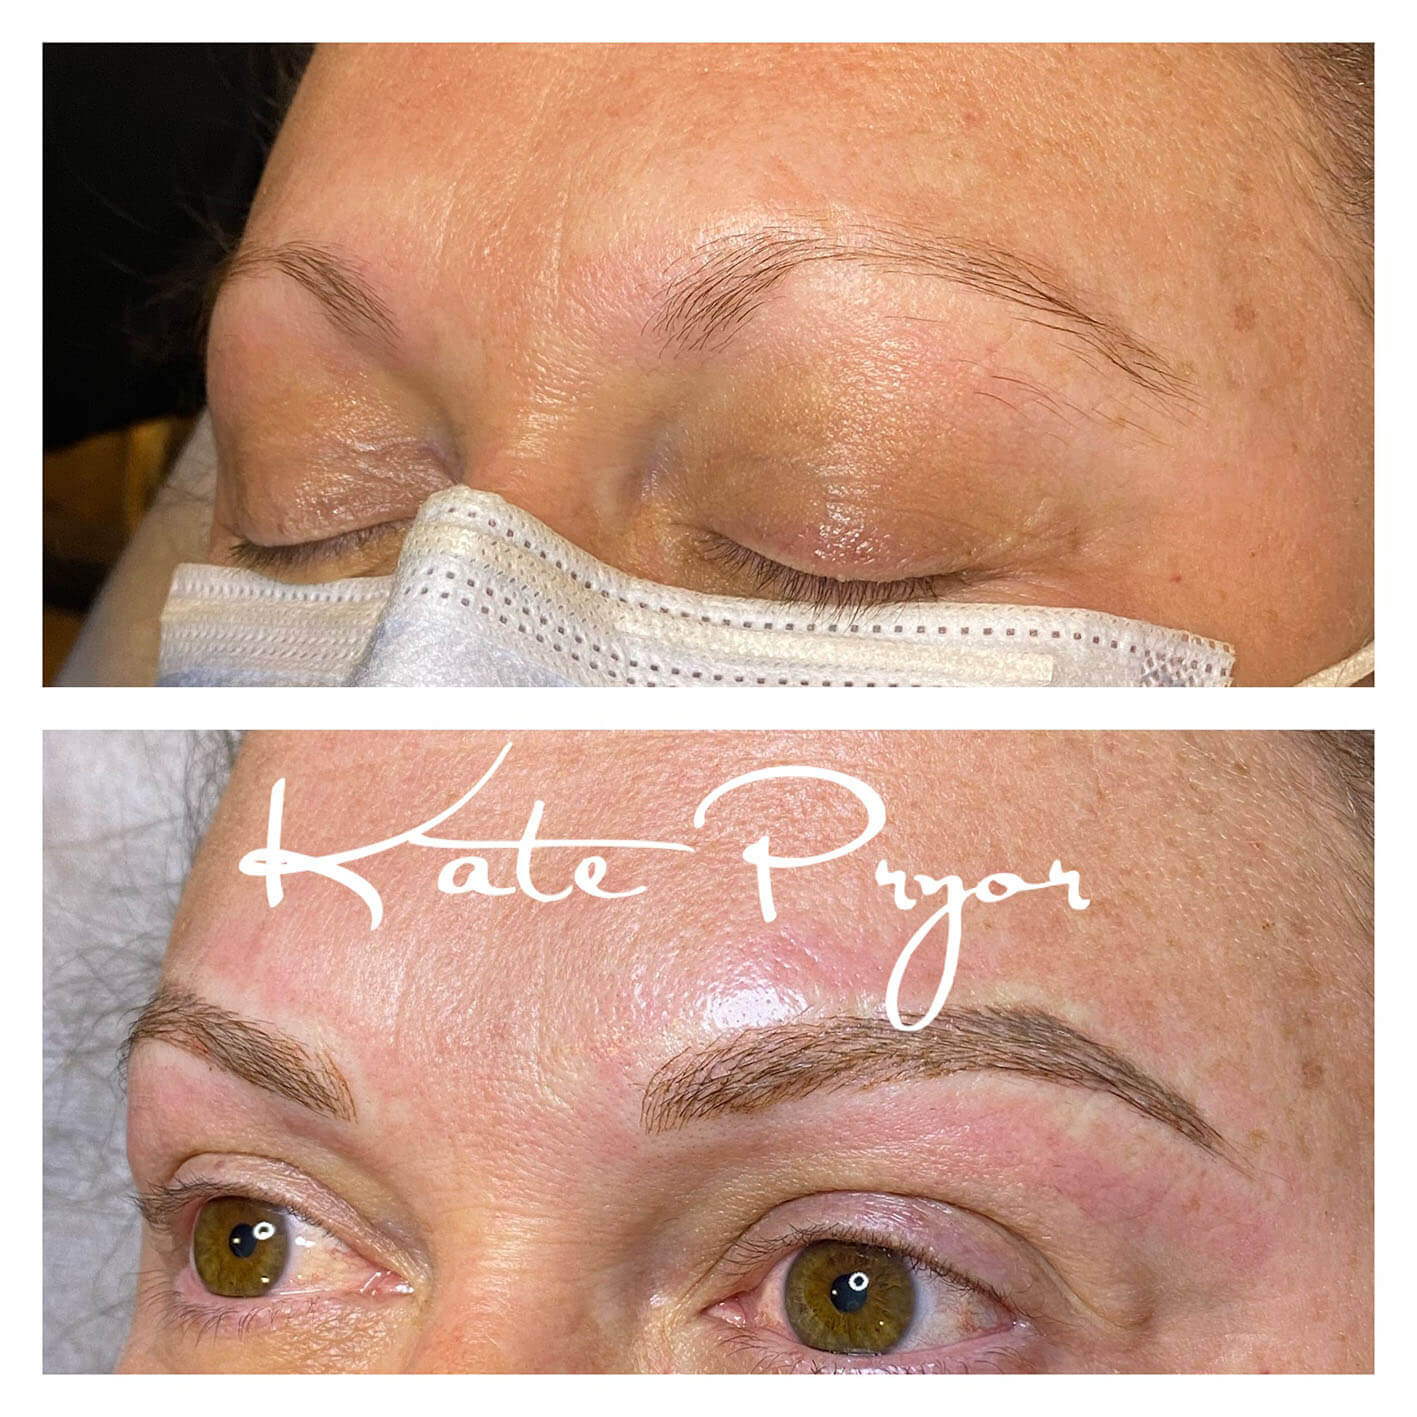 Elite-Skin-Cosmetic-Tattooing-Kate-Pryor-Before-After-22